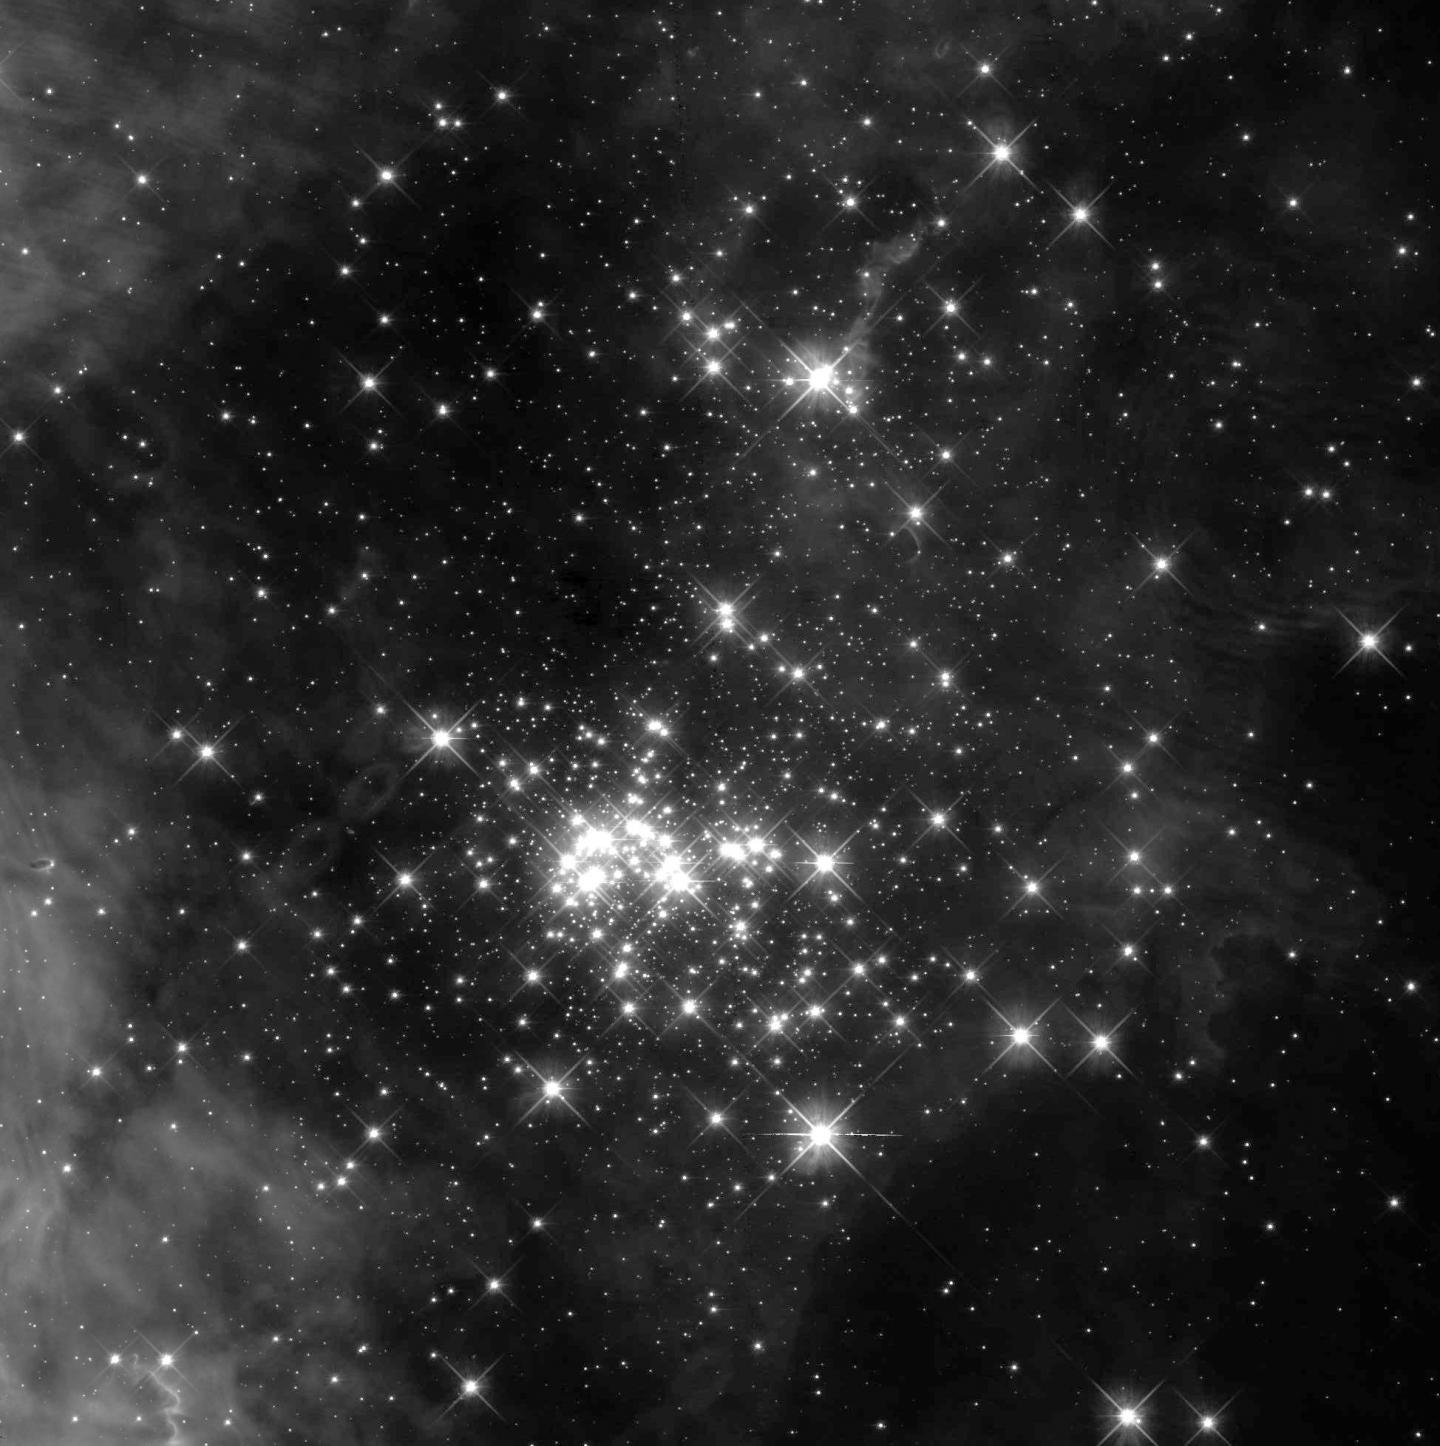 Black and White Image of the Center of the Westerlund 2 Cluster